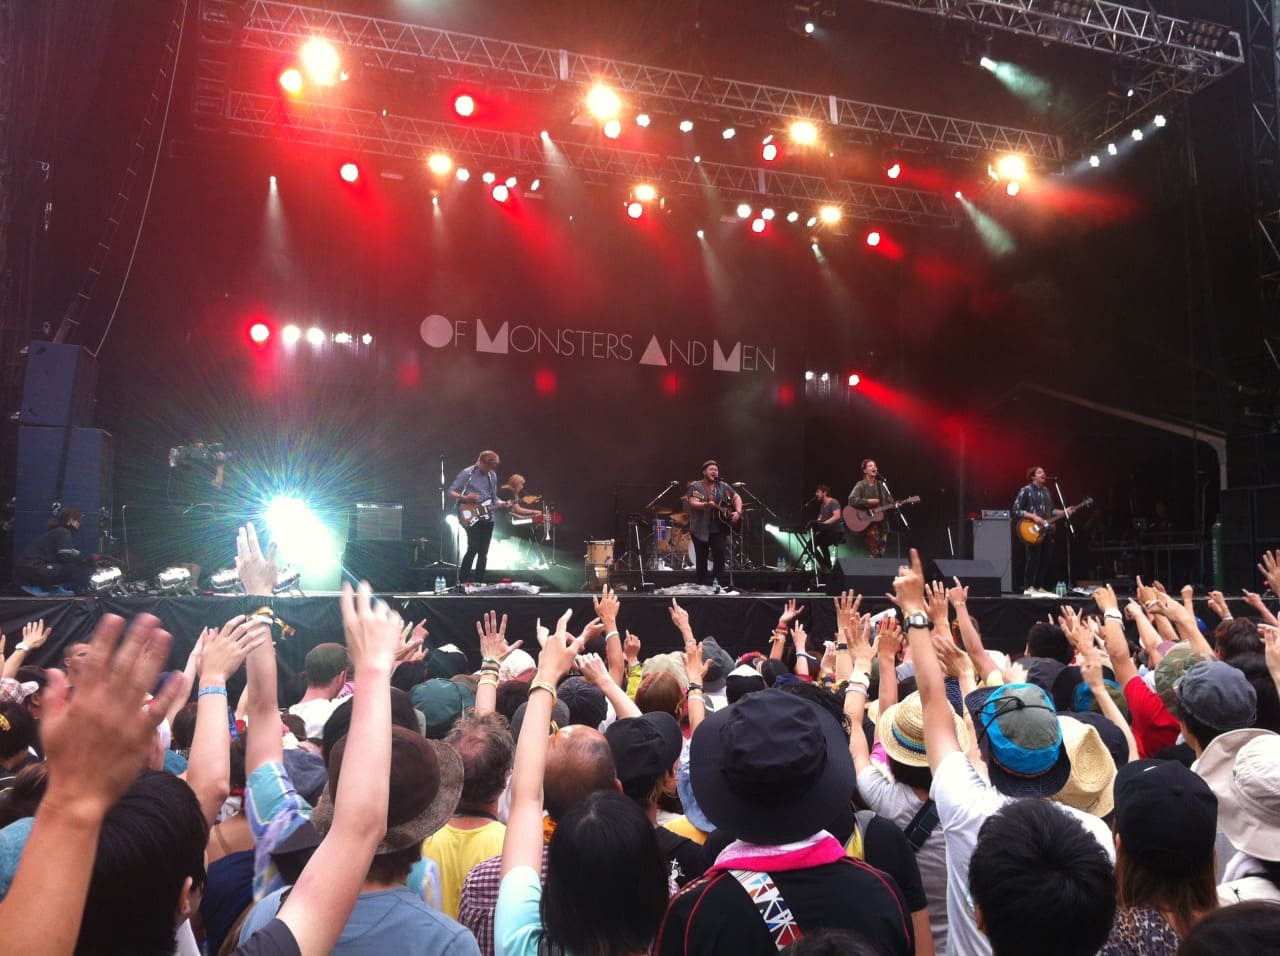 OF MONSTERS AND MEN FUJI ROCK FESTIVAL ’13 – White Stage